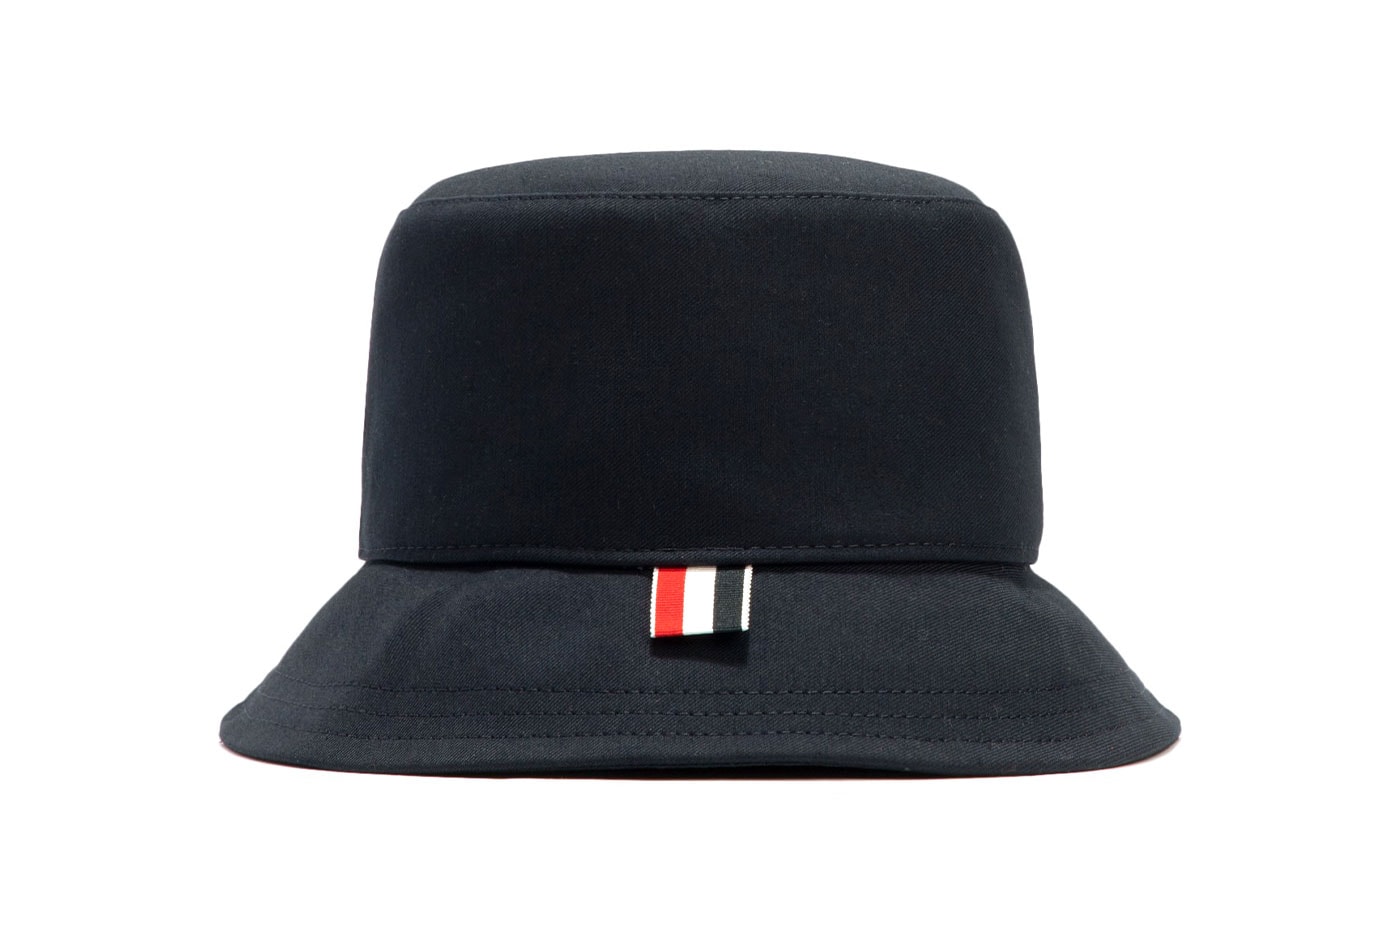 Thom Browne Spring 2022 New Arrivals HBX Release Info Buy Price Leather Goods Cardholder Square Tote Shorts Sweatpants Sweatshirt Suit Classic Wool Cotton Bucket Hat Socks Neck Tie